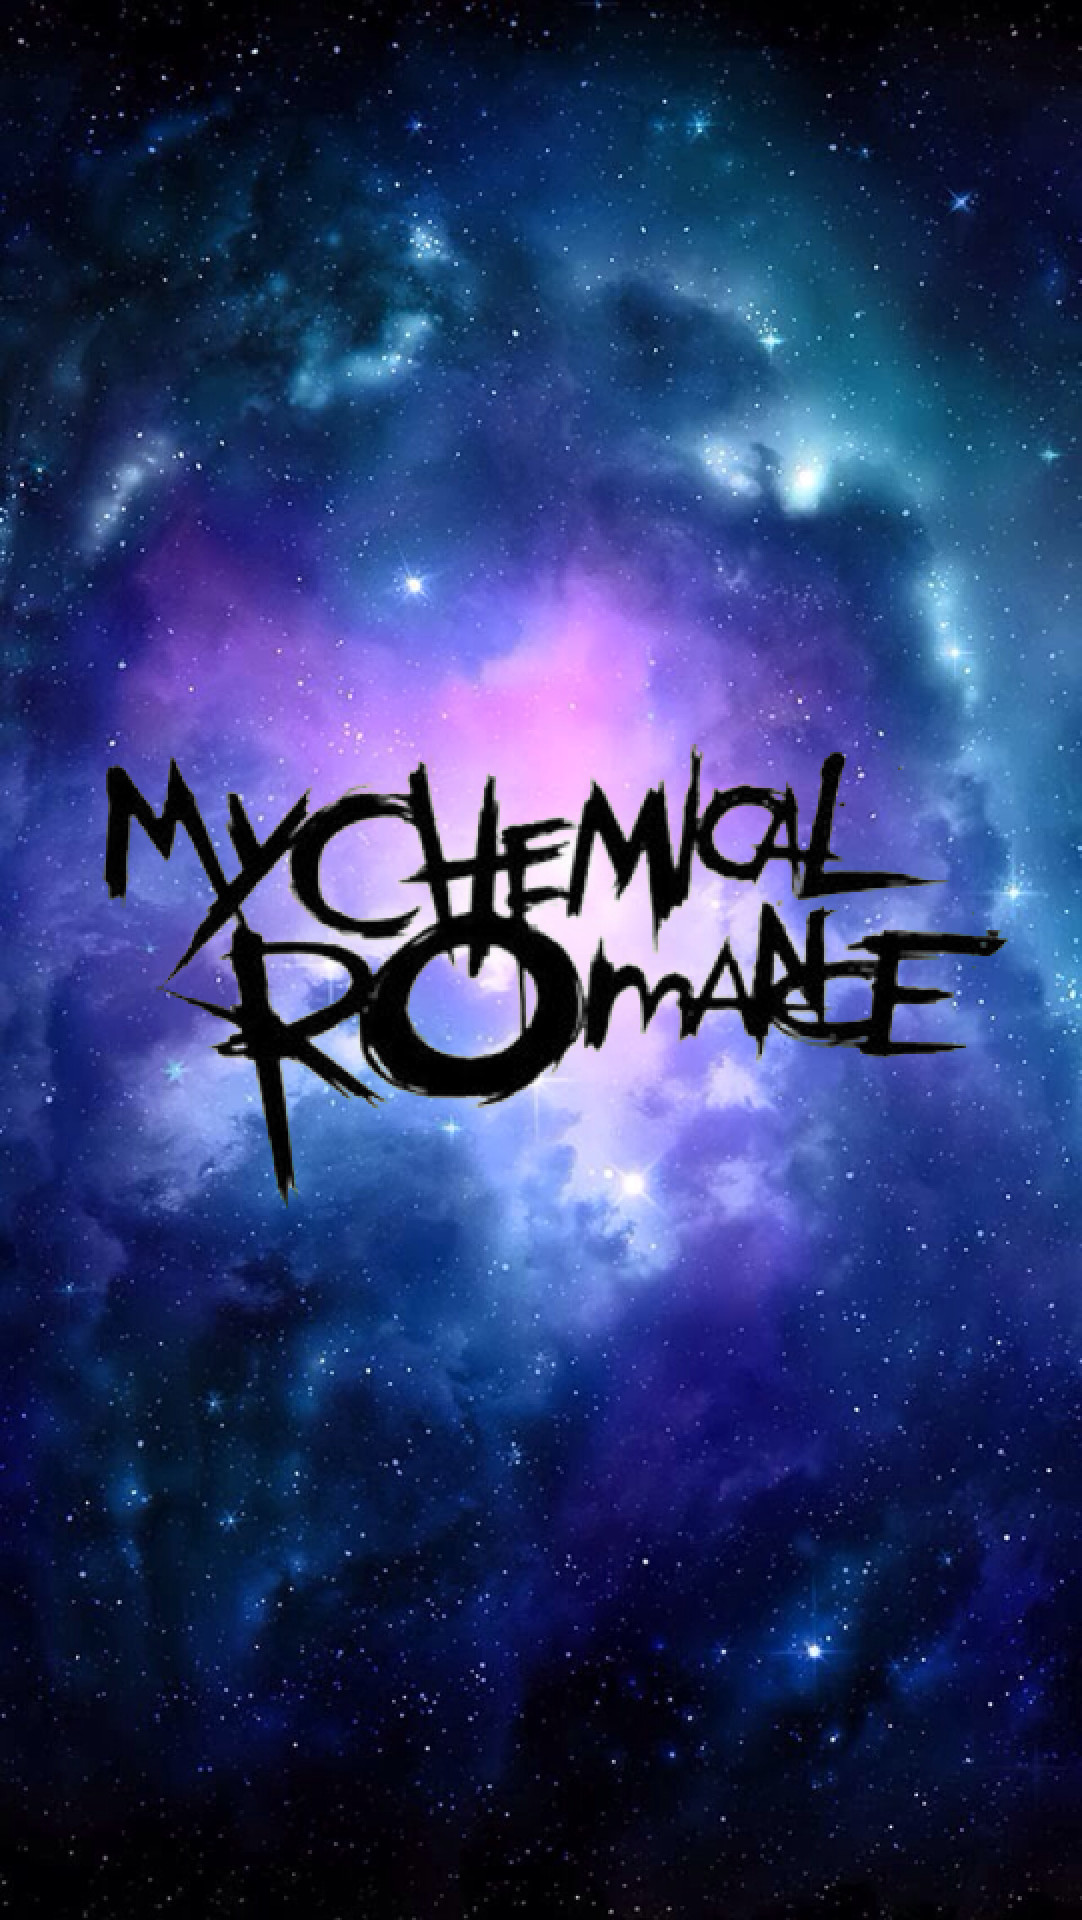 My Chemical Romance Wallpaper For Iphone 5 That I Made - My Chemical Romance The Black Parade Png - HD Wallpaper 